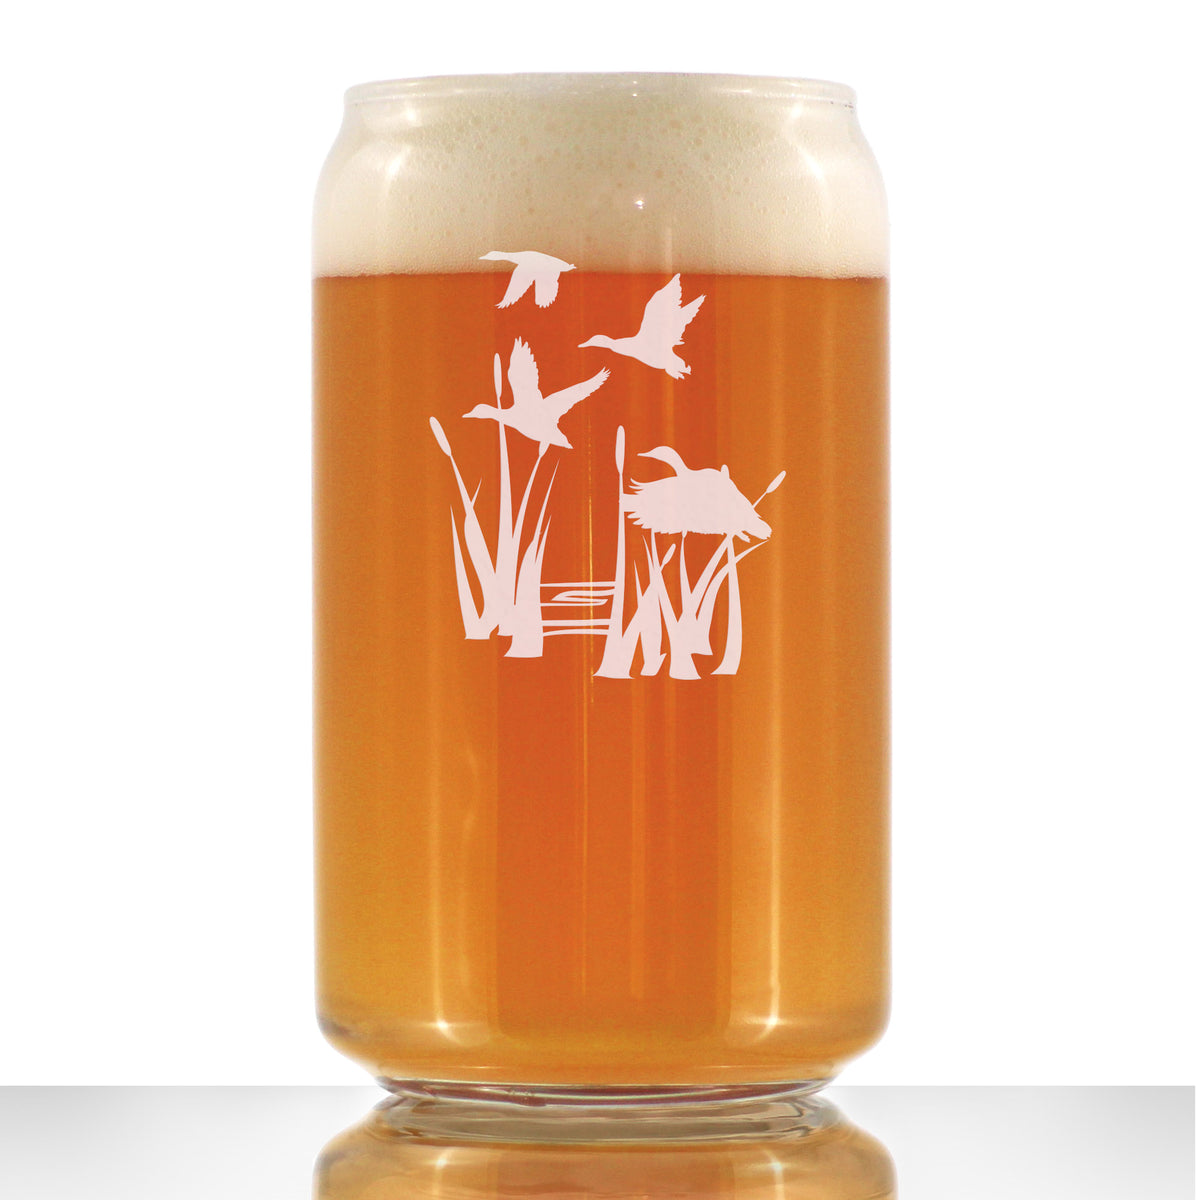 Duck Pond Beer Can Pint Glass - Cabin Themed Gifts or Rustic Decor for Men and Women - Fun Drinking or Party Glasses - 16 oz